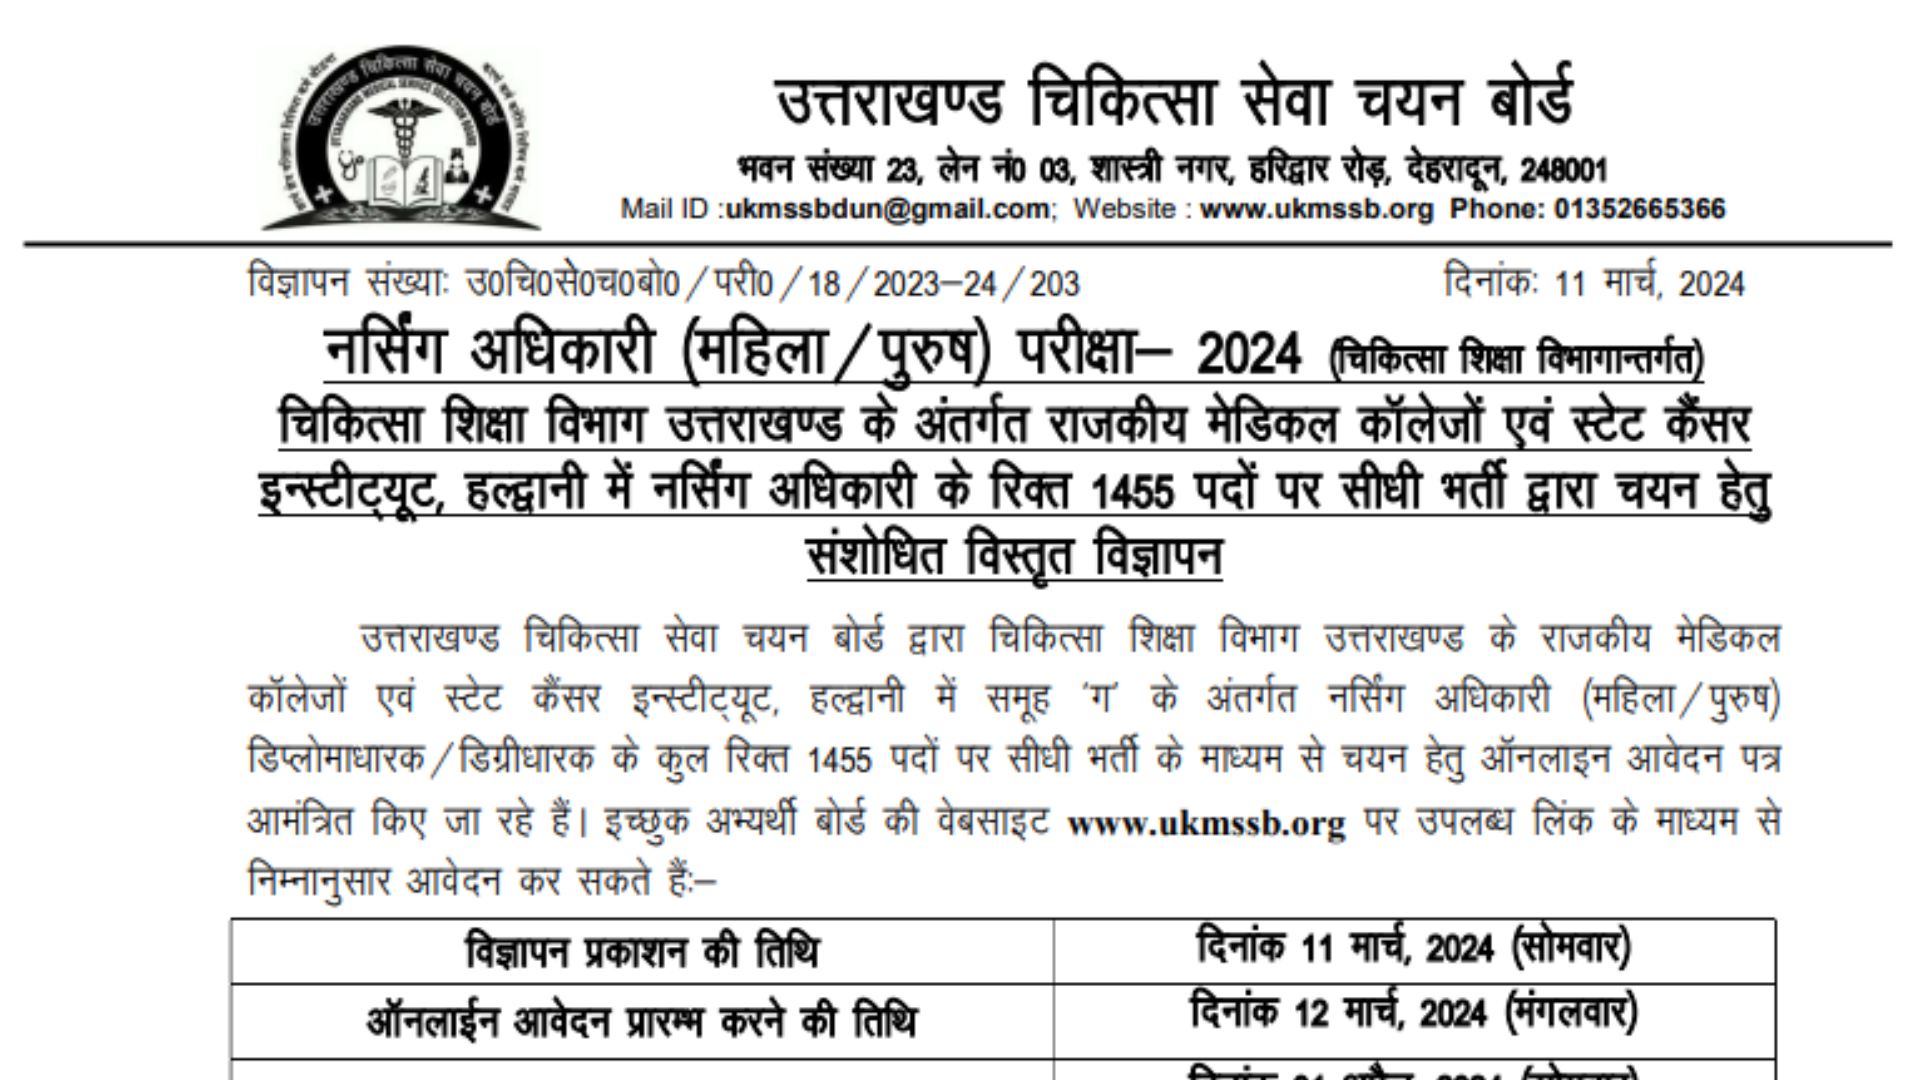 UKMSSB Nursing Officer Recruitment 2024 [1455 Post] Notification and Online Application Form